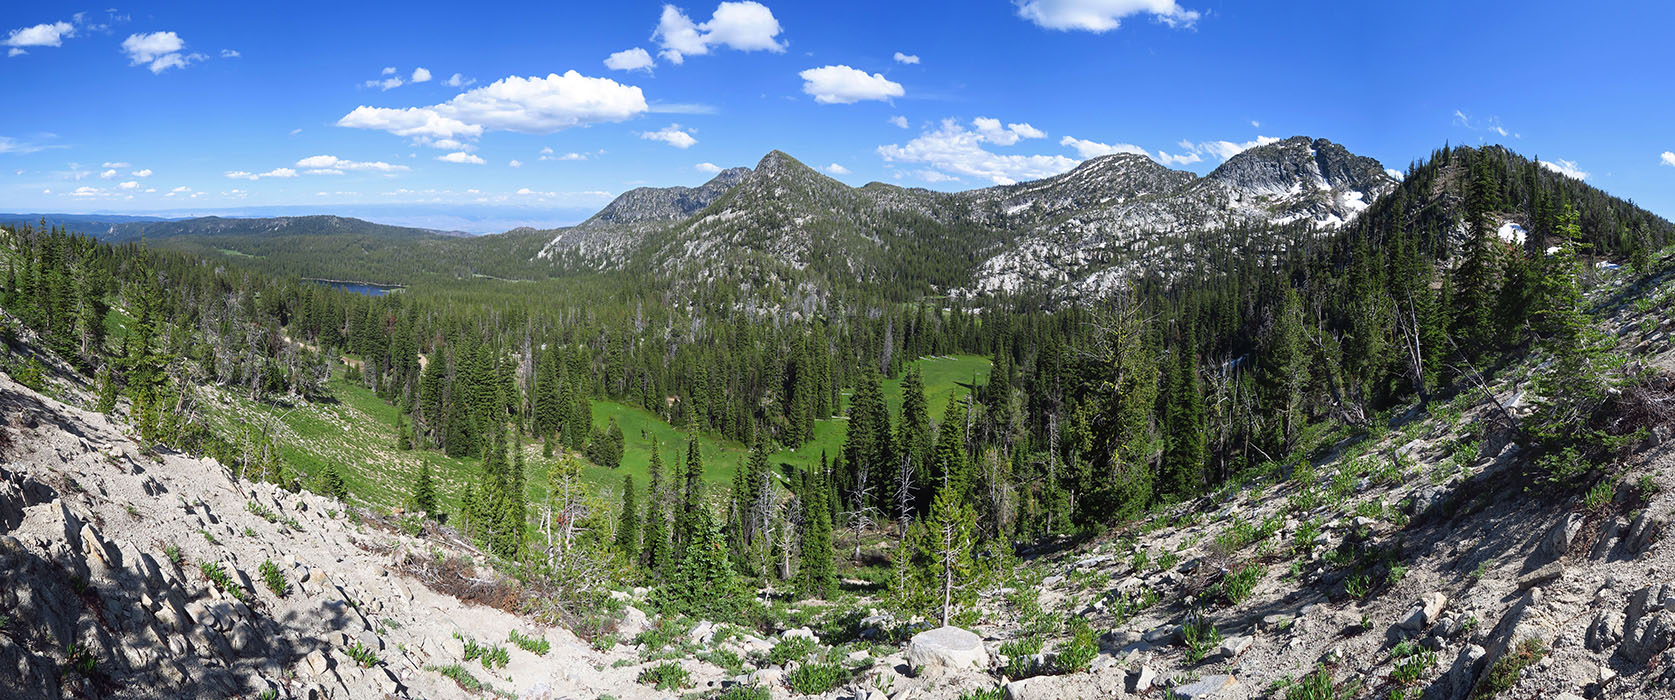 Anthony Lakes Basin panorama [Forest Road 7300-187, Wallowa-Whitman National Forest, Baker County, Oregon]